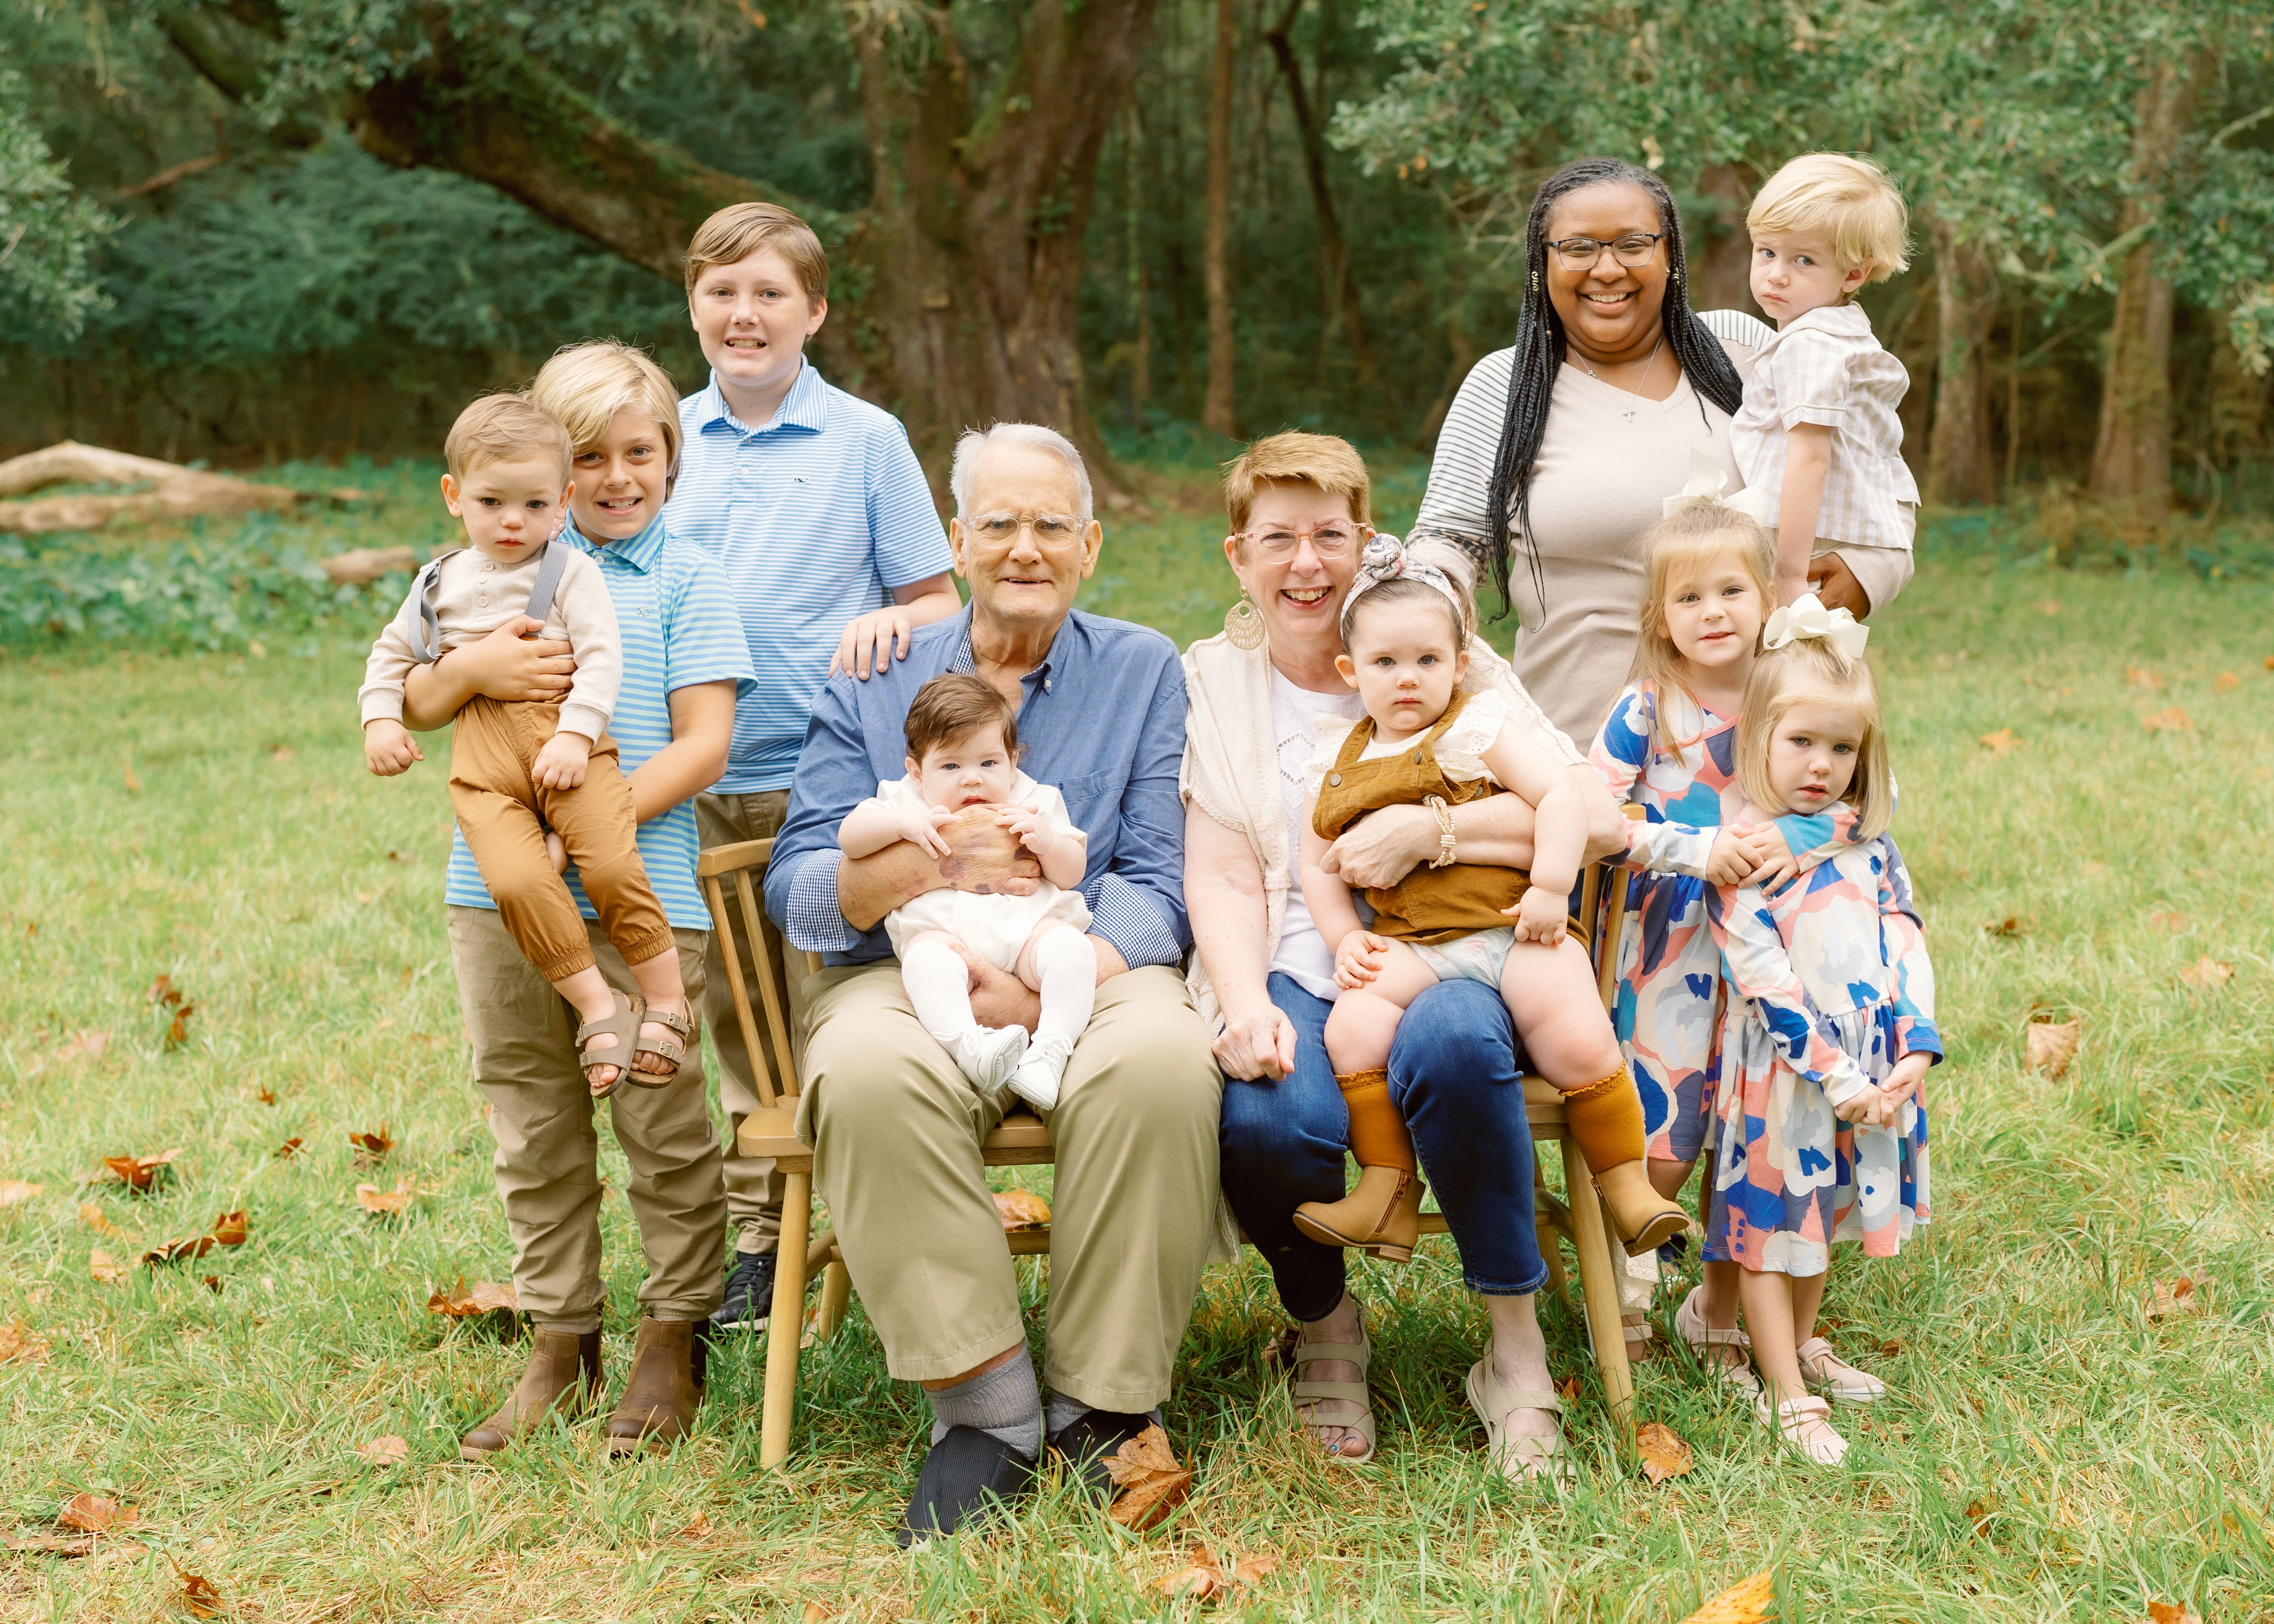 Cathy Carothers with husband and grandchildren